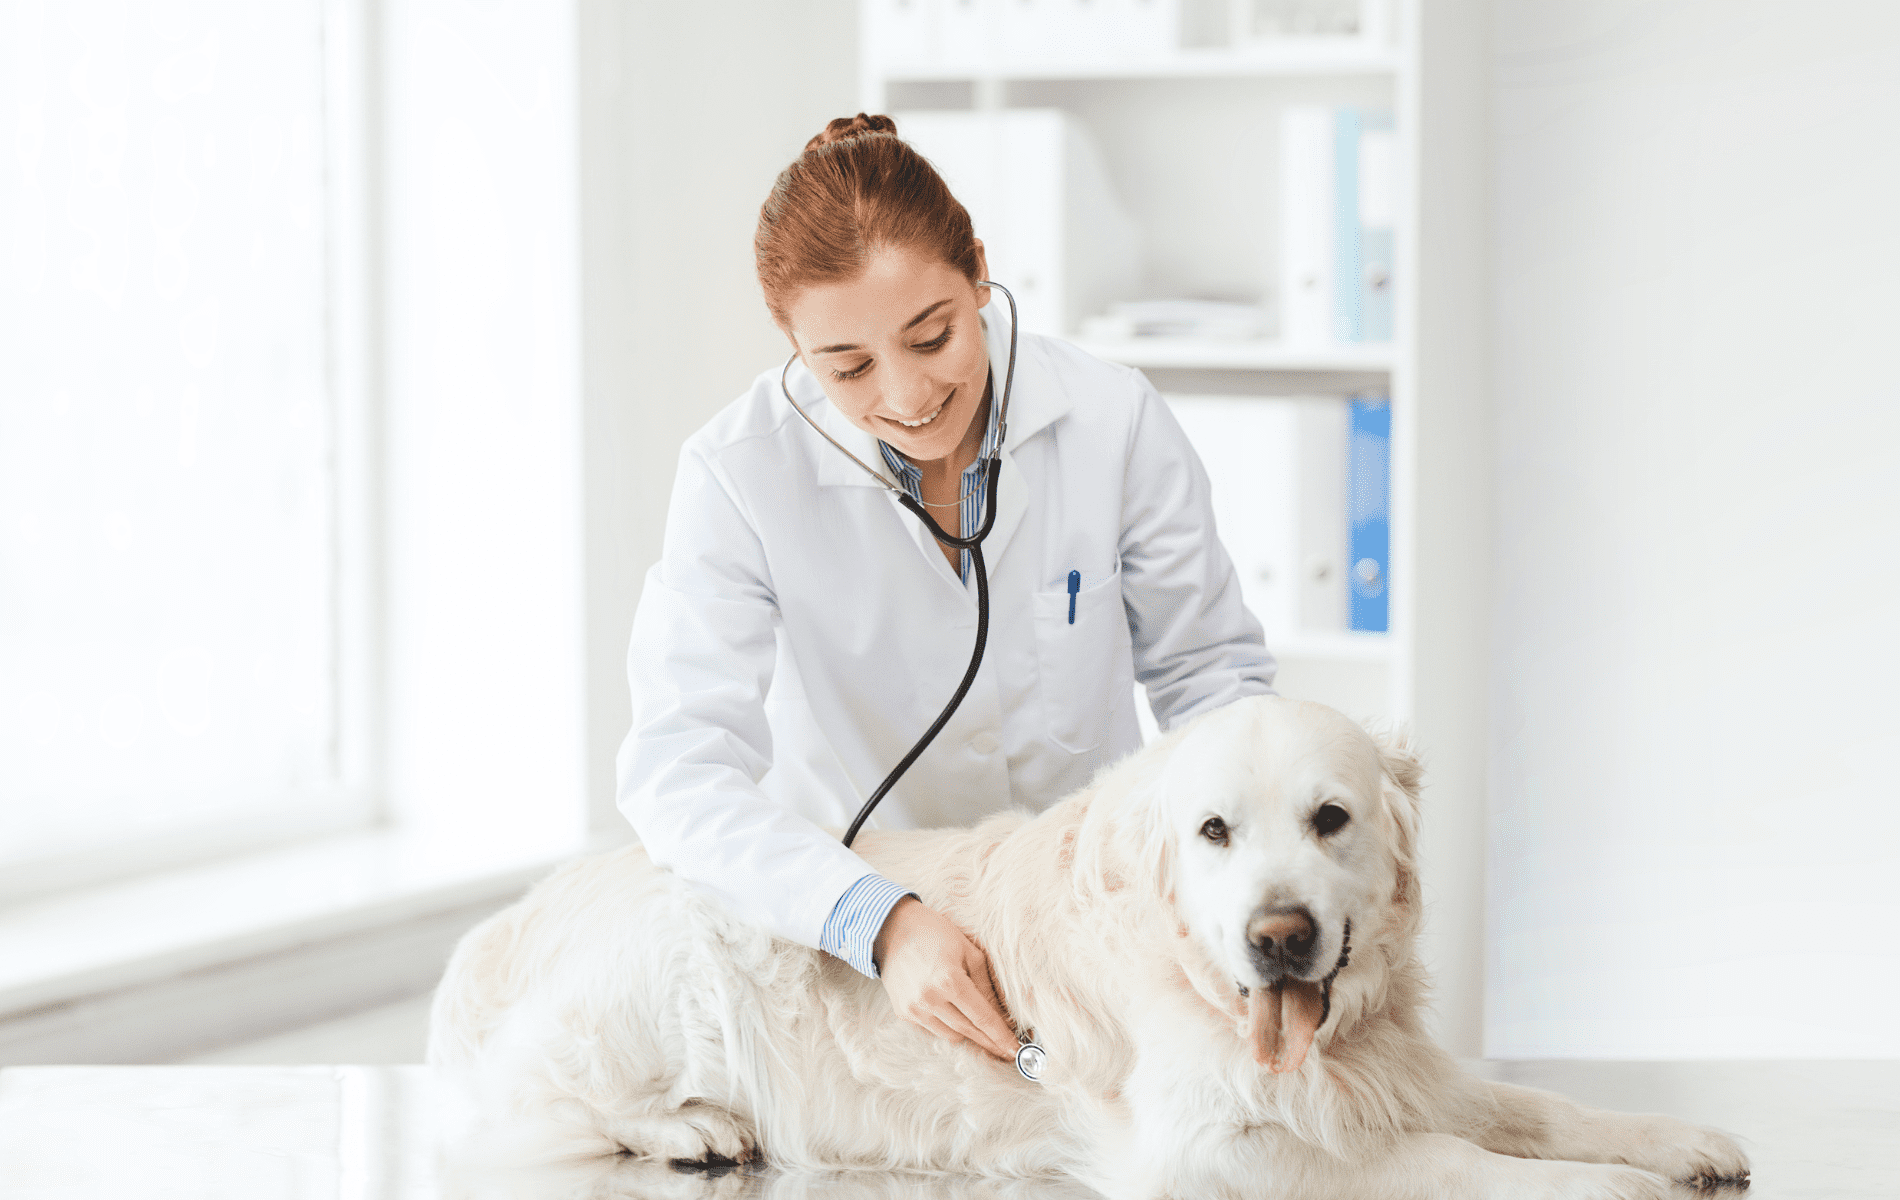 a person in a white coat with a stethoscope on a dog